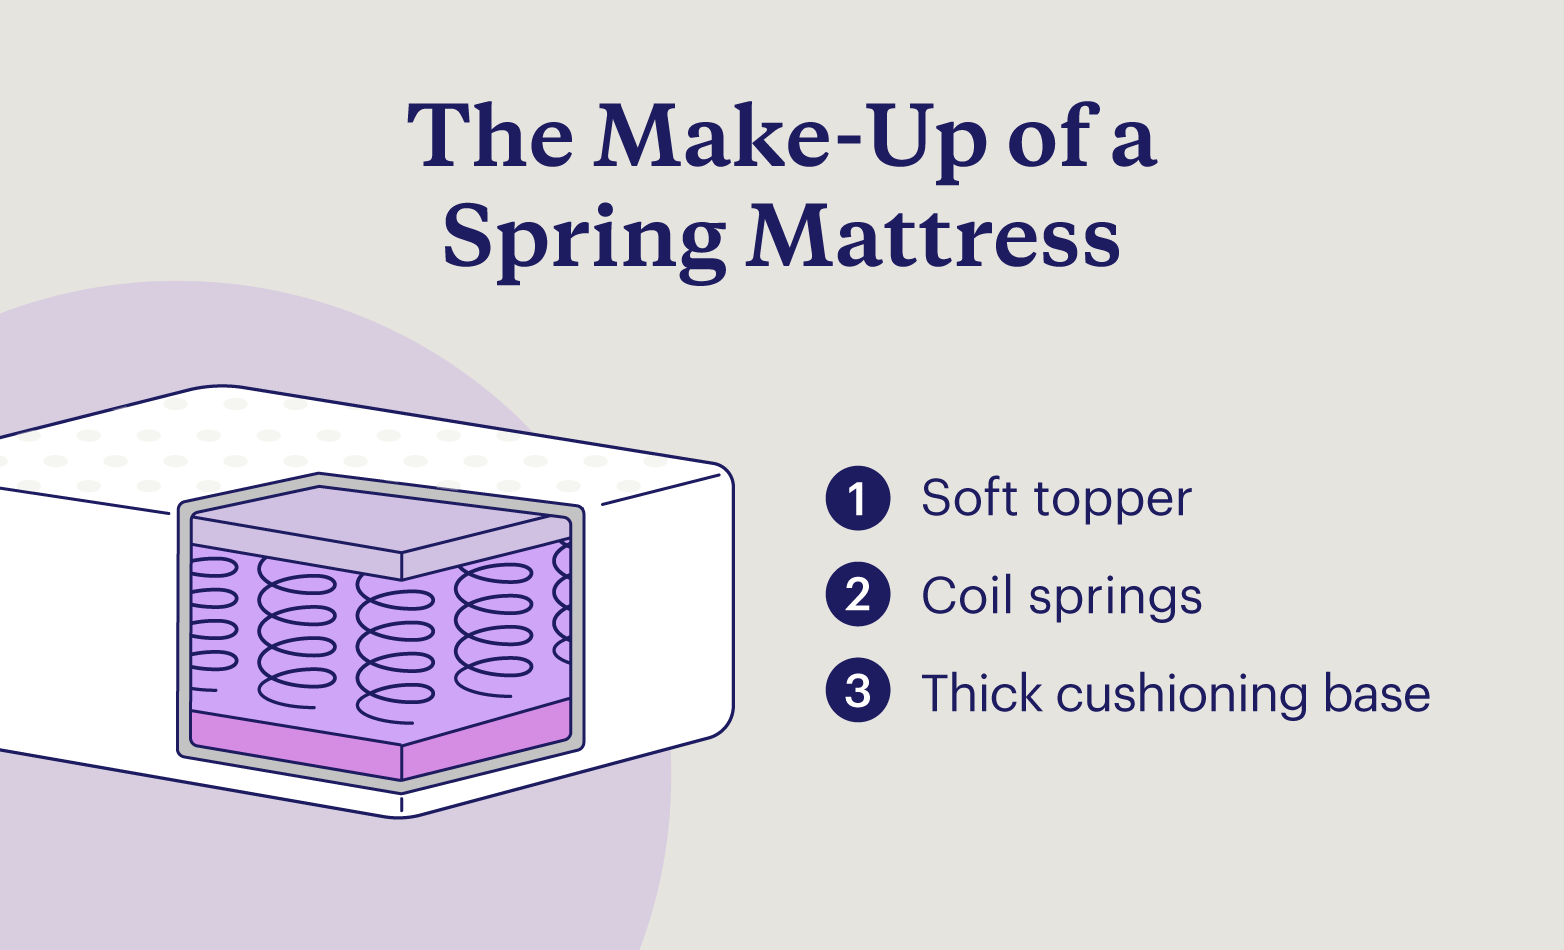 Graphic showing the layers of a spring mattress.